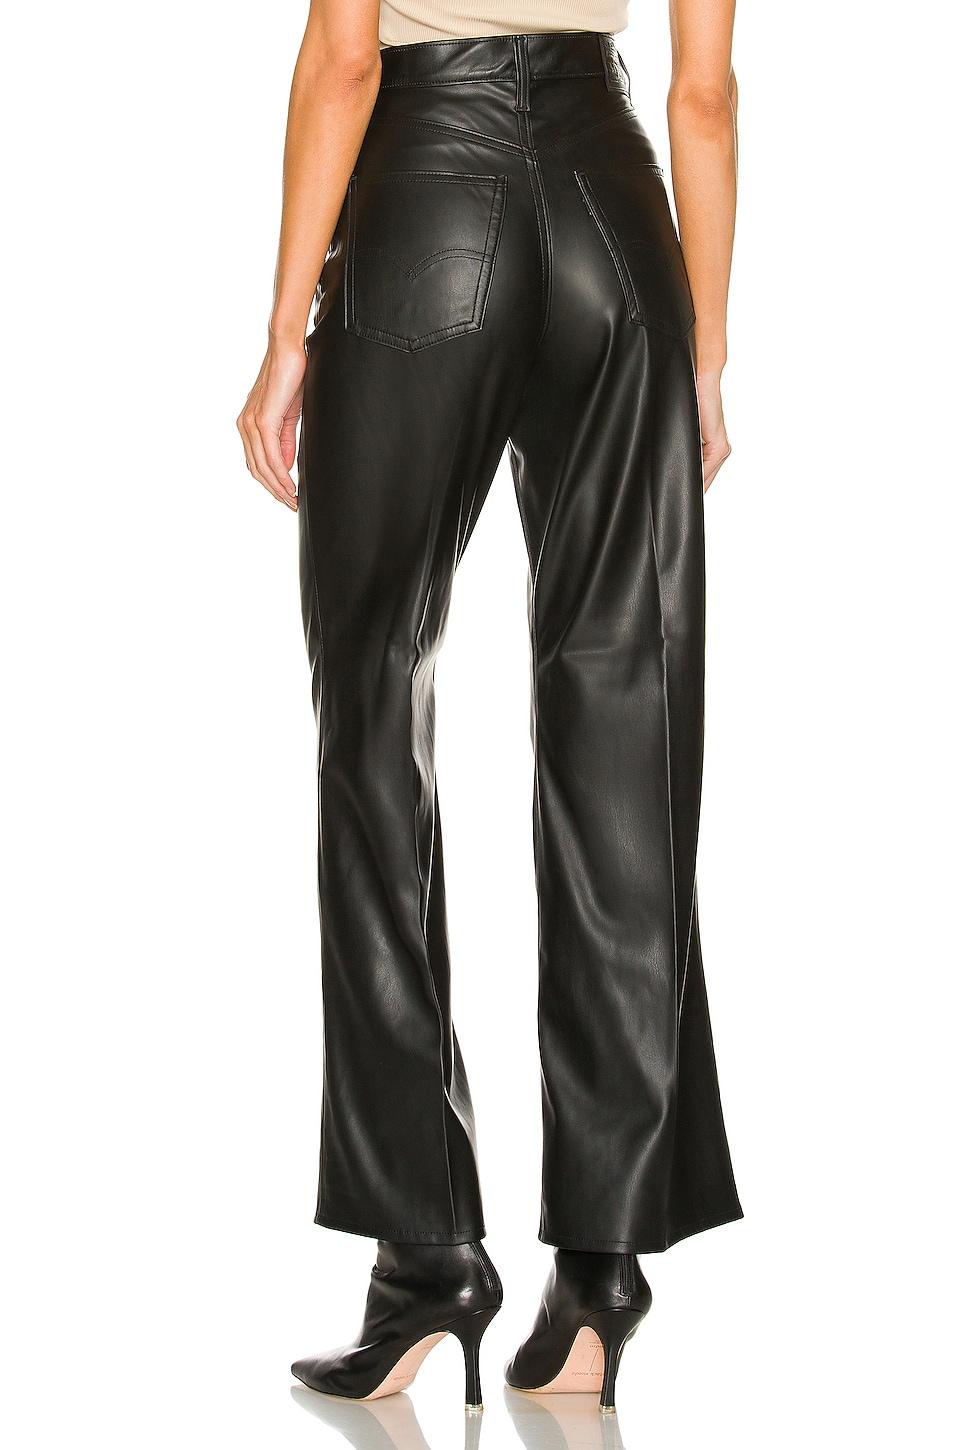 Levi's 70s Flare Faux Leather Pant in Black | Lyst